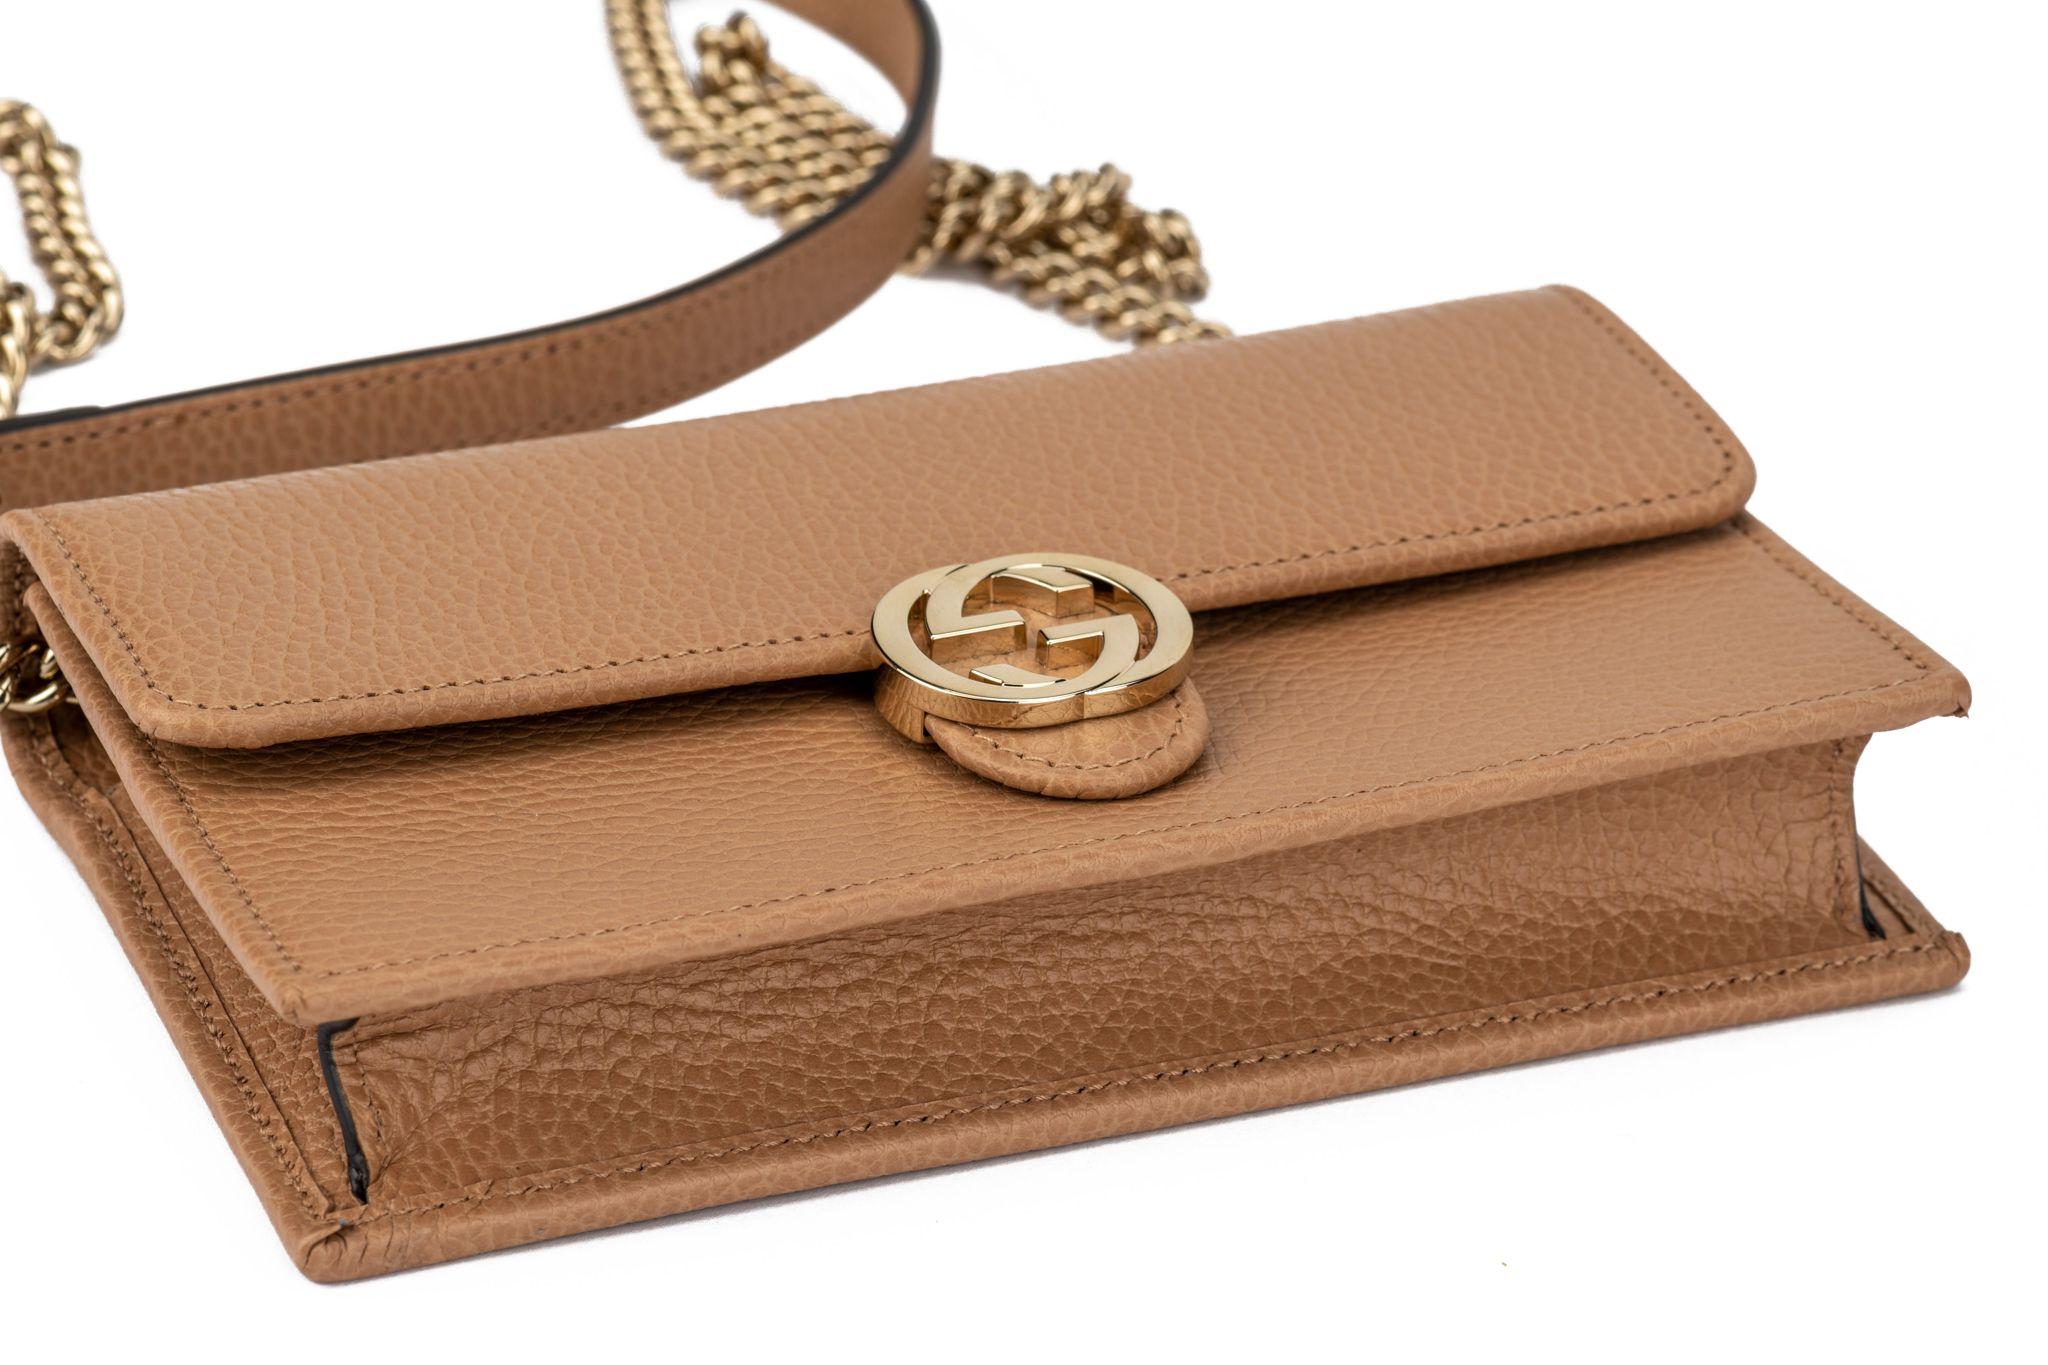 Gucci New Camel Leather Cross Body/Clutch Bag For Sale 7